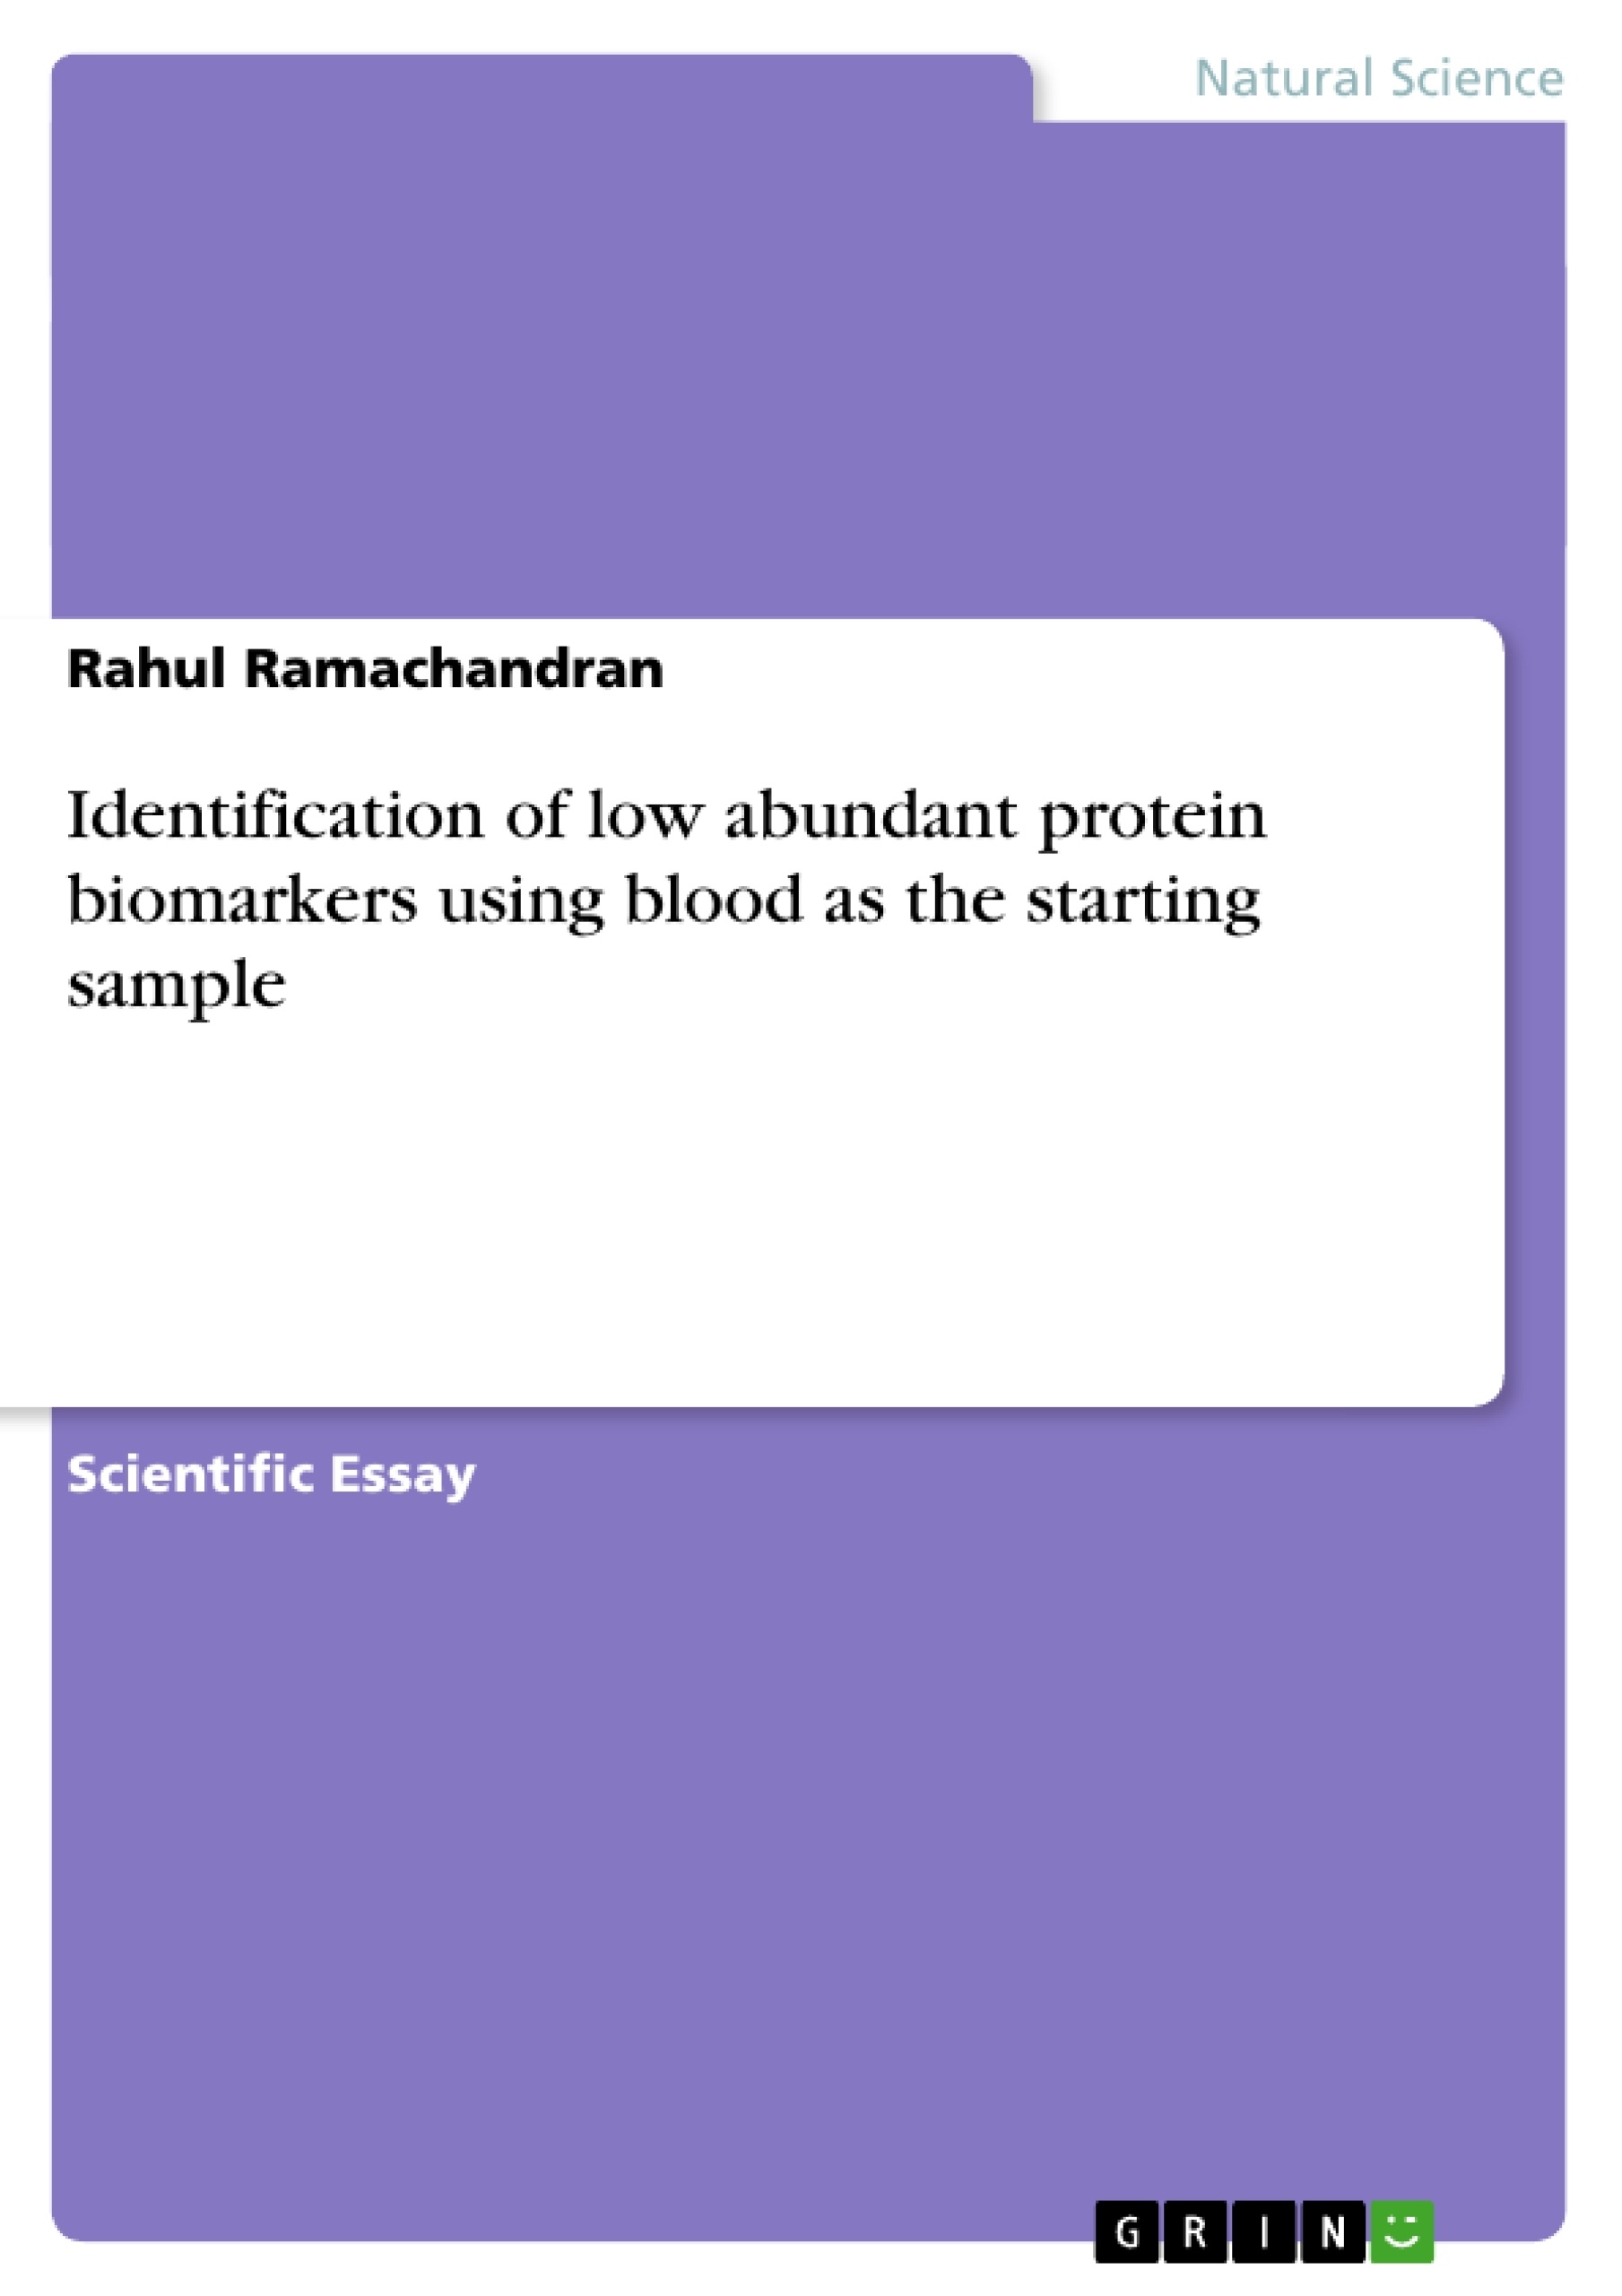 Titre: Identification of low abundant protein biomarkers using blood as the starting sample